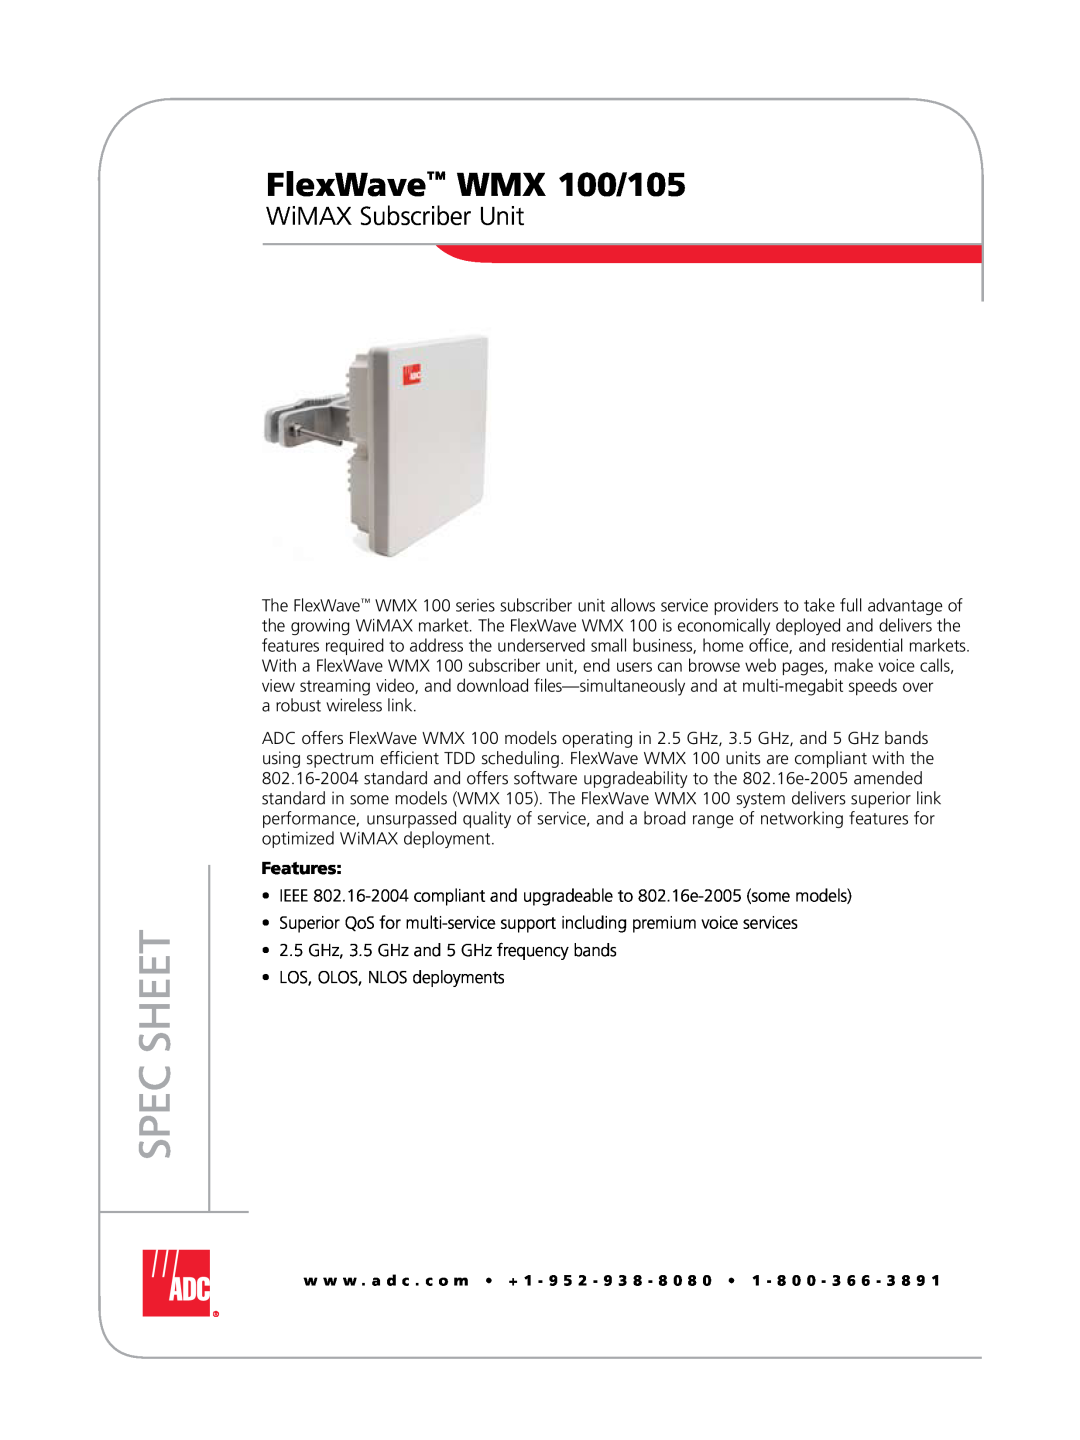 ADC manual FlexWave WMX 100/105, WiMAX Subscriber Unit, Spec Sheet, Features 